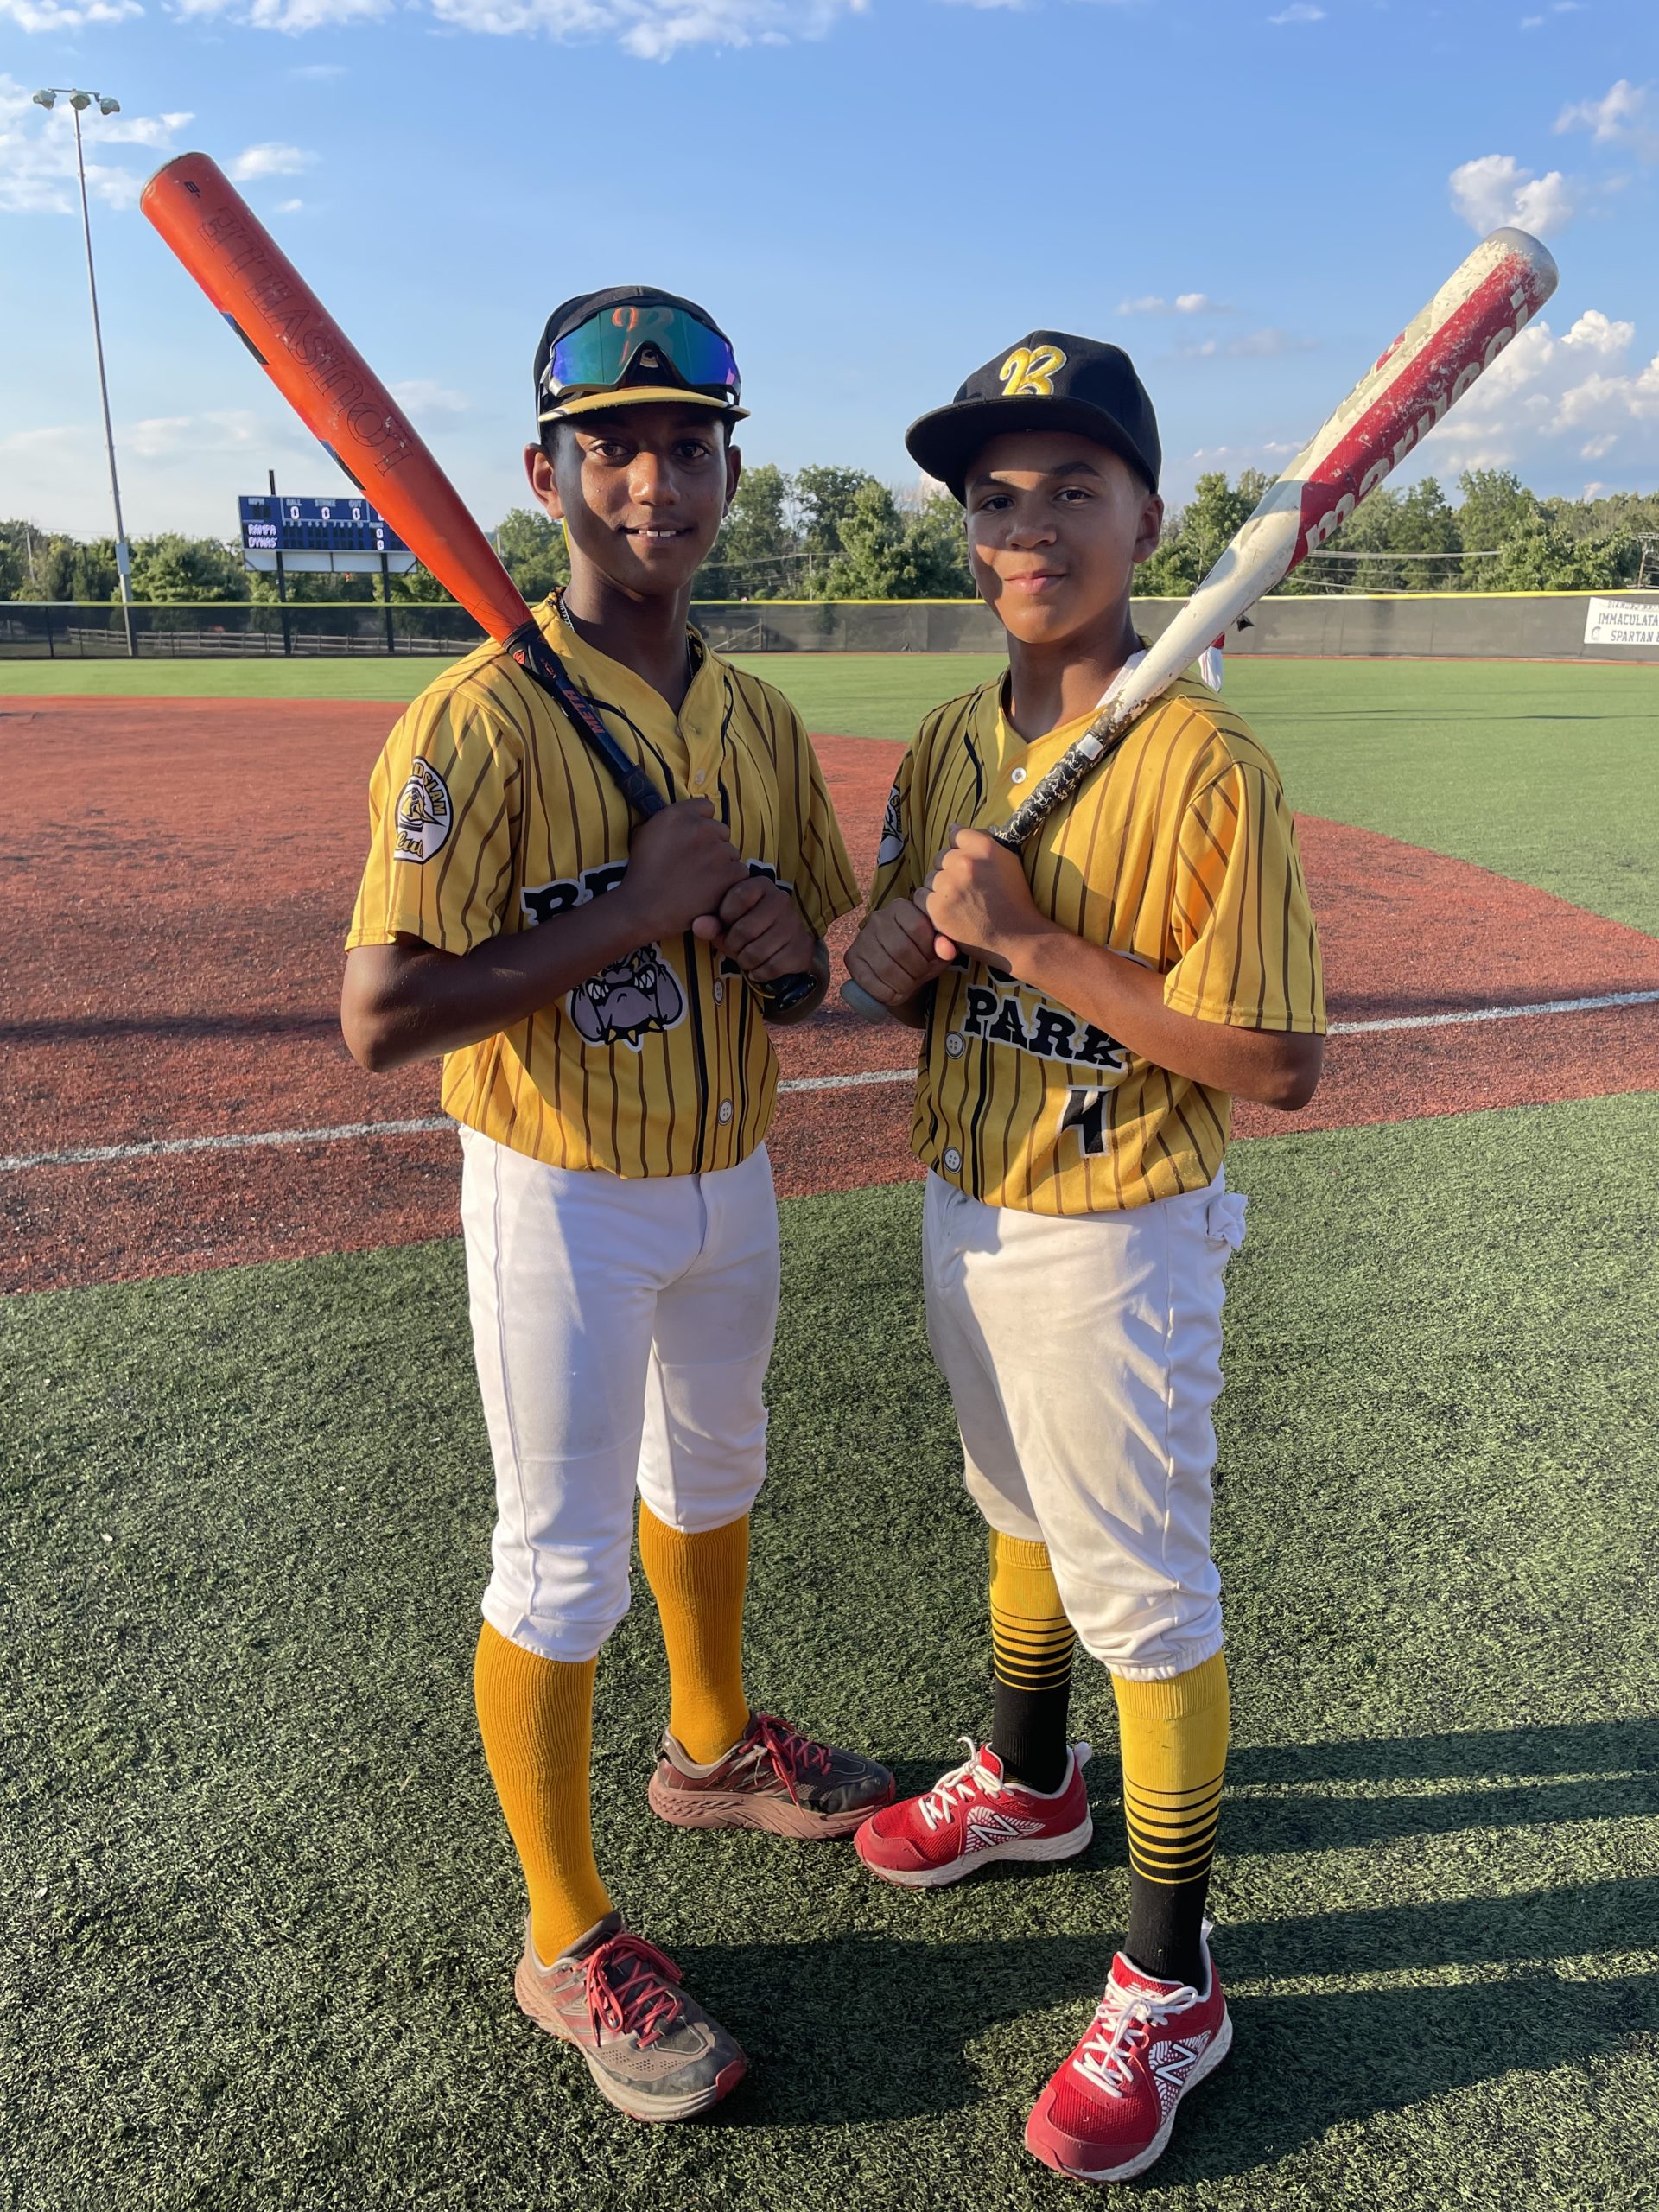 Puello and company steer Grand Slam in Summer Finale – Diamond Nation